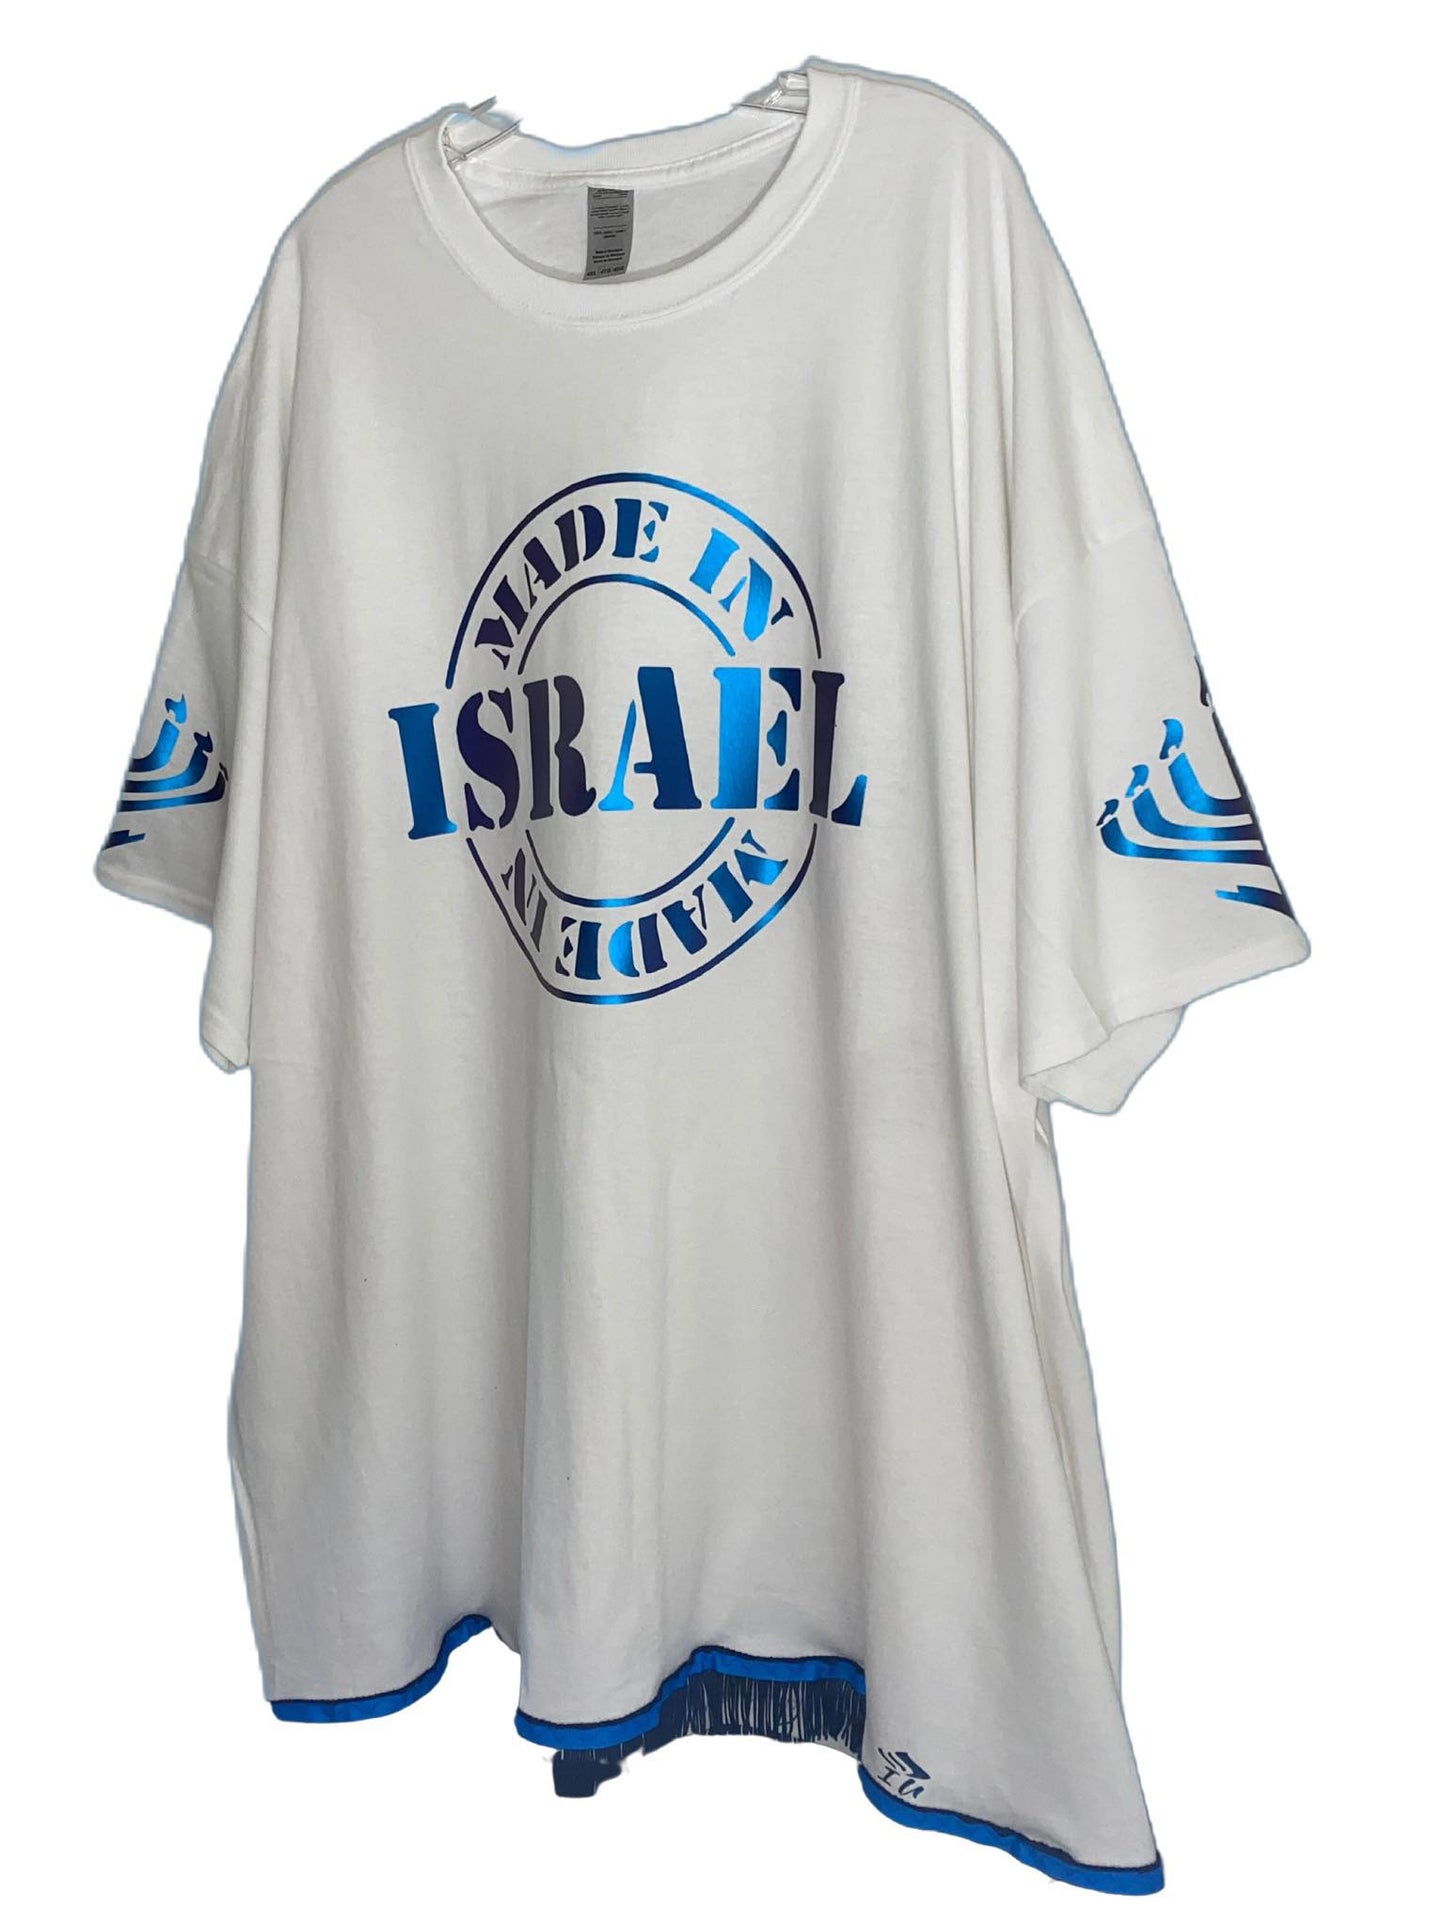 MADE IN ISRAEL T-SHIRT